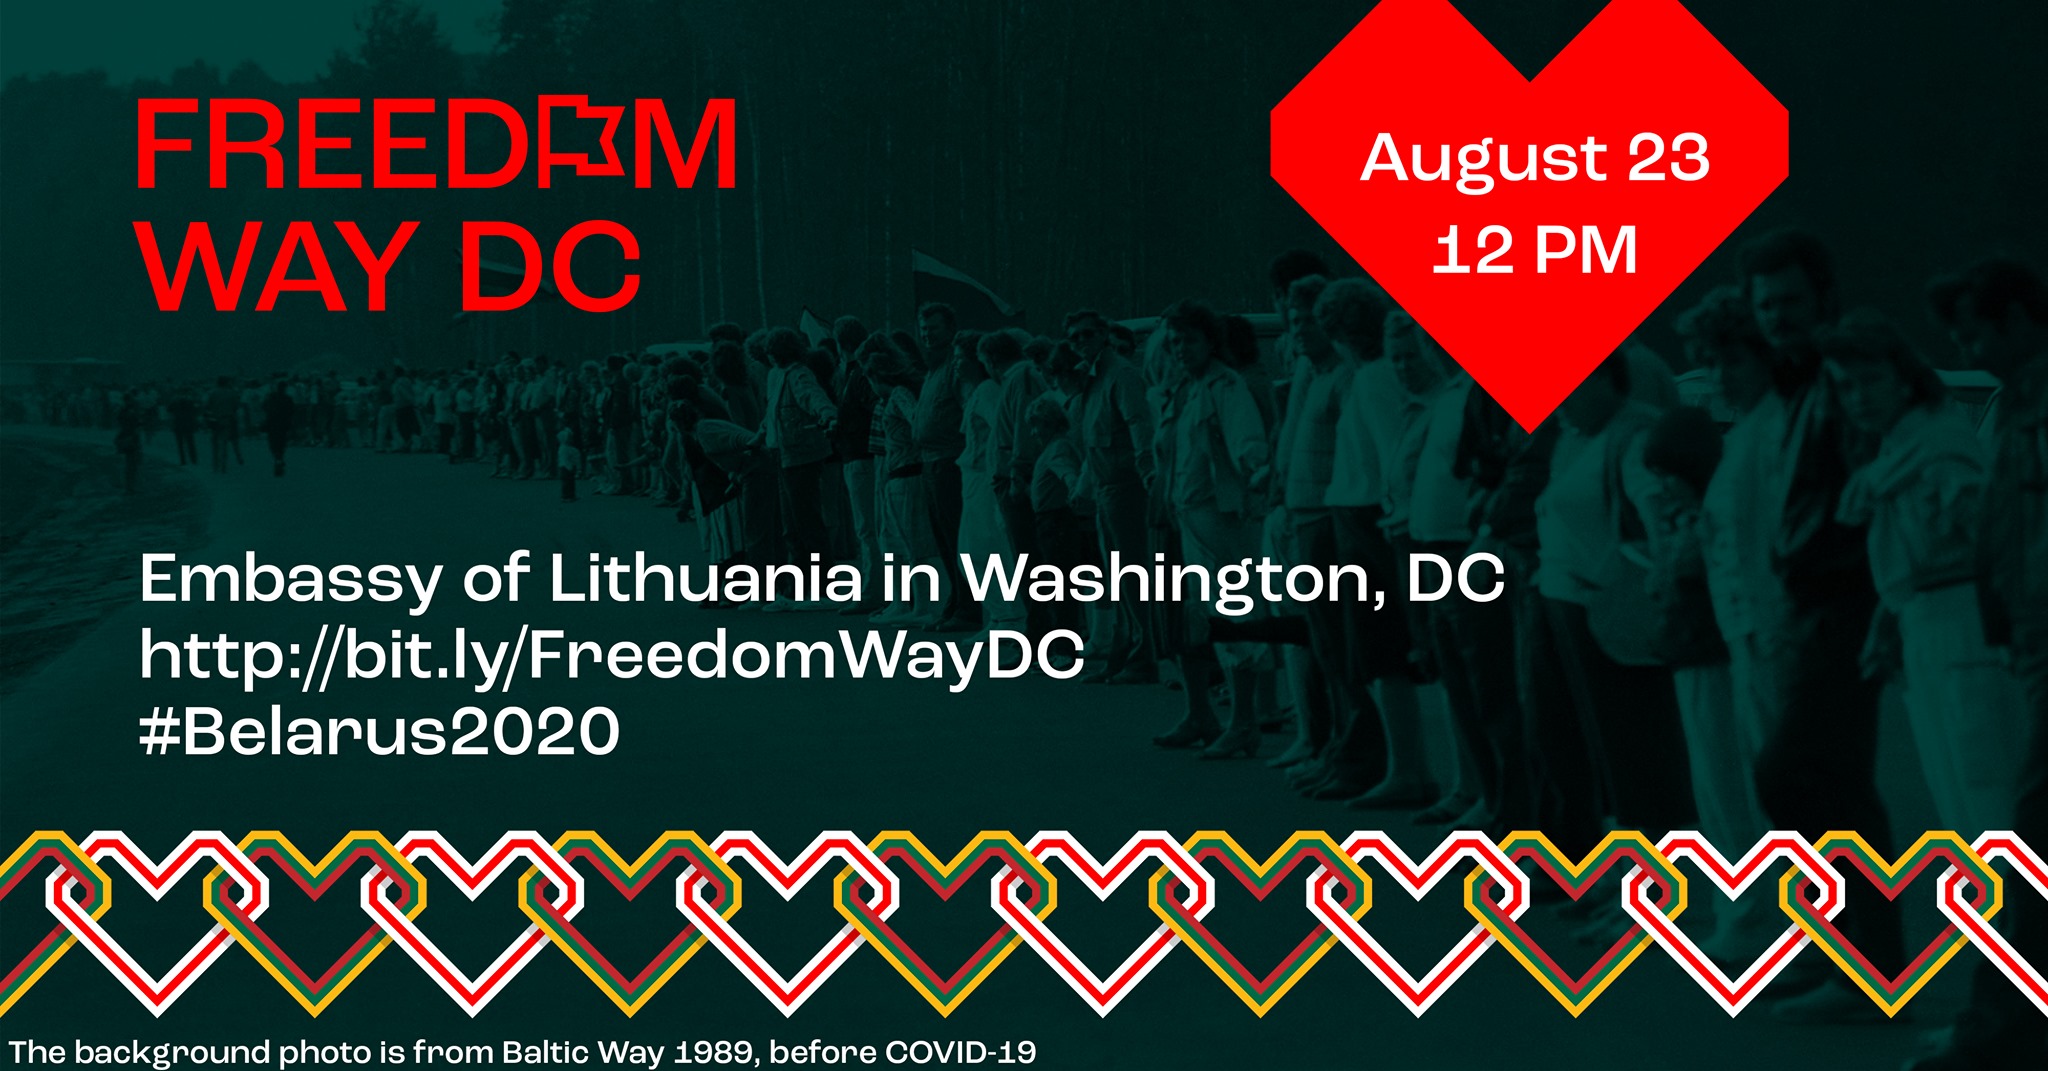 Freedom Way DC, a Socially Distanced Human Chain action to commemorate a Baltic Way protest and support People of Belarus